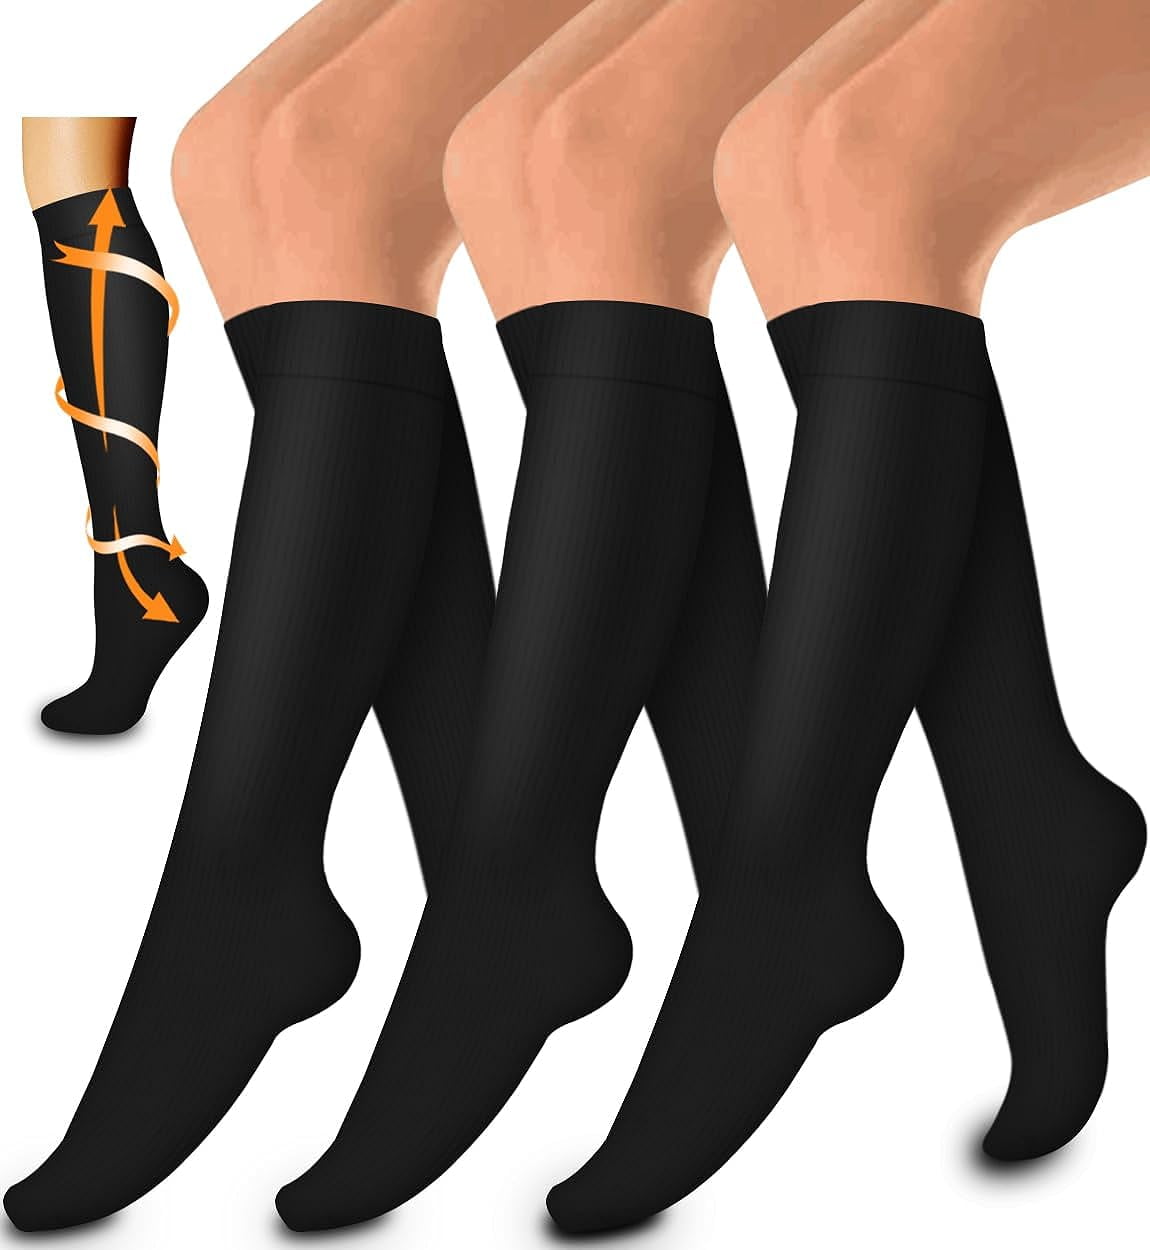 8-Pairs Laite Hebe Compression Socks only $18.55